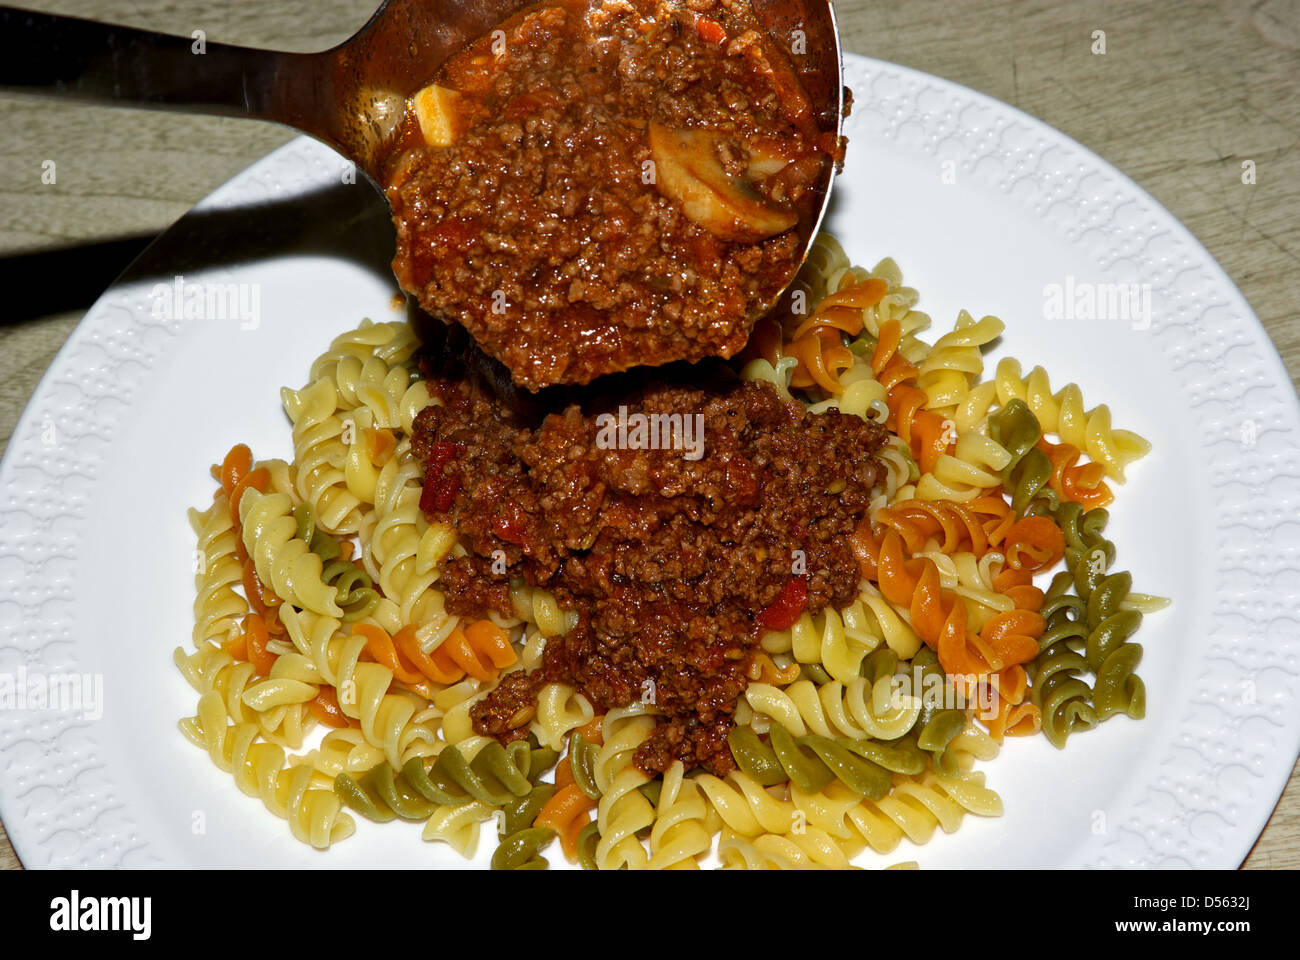 Ladle rich tomato mushroom meat Bolognese sauce over plate steaming hot cooked tricolour rotini pasta Stock Photo